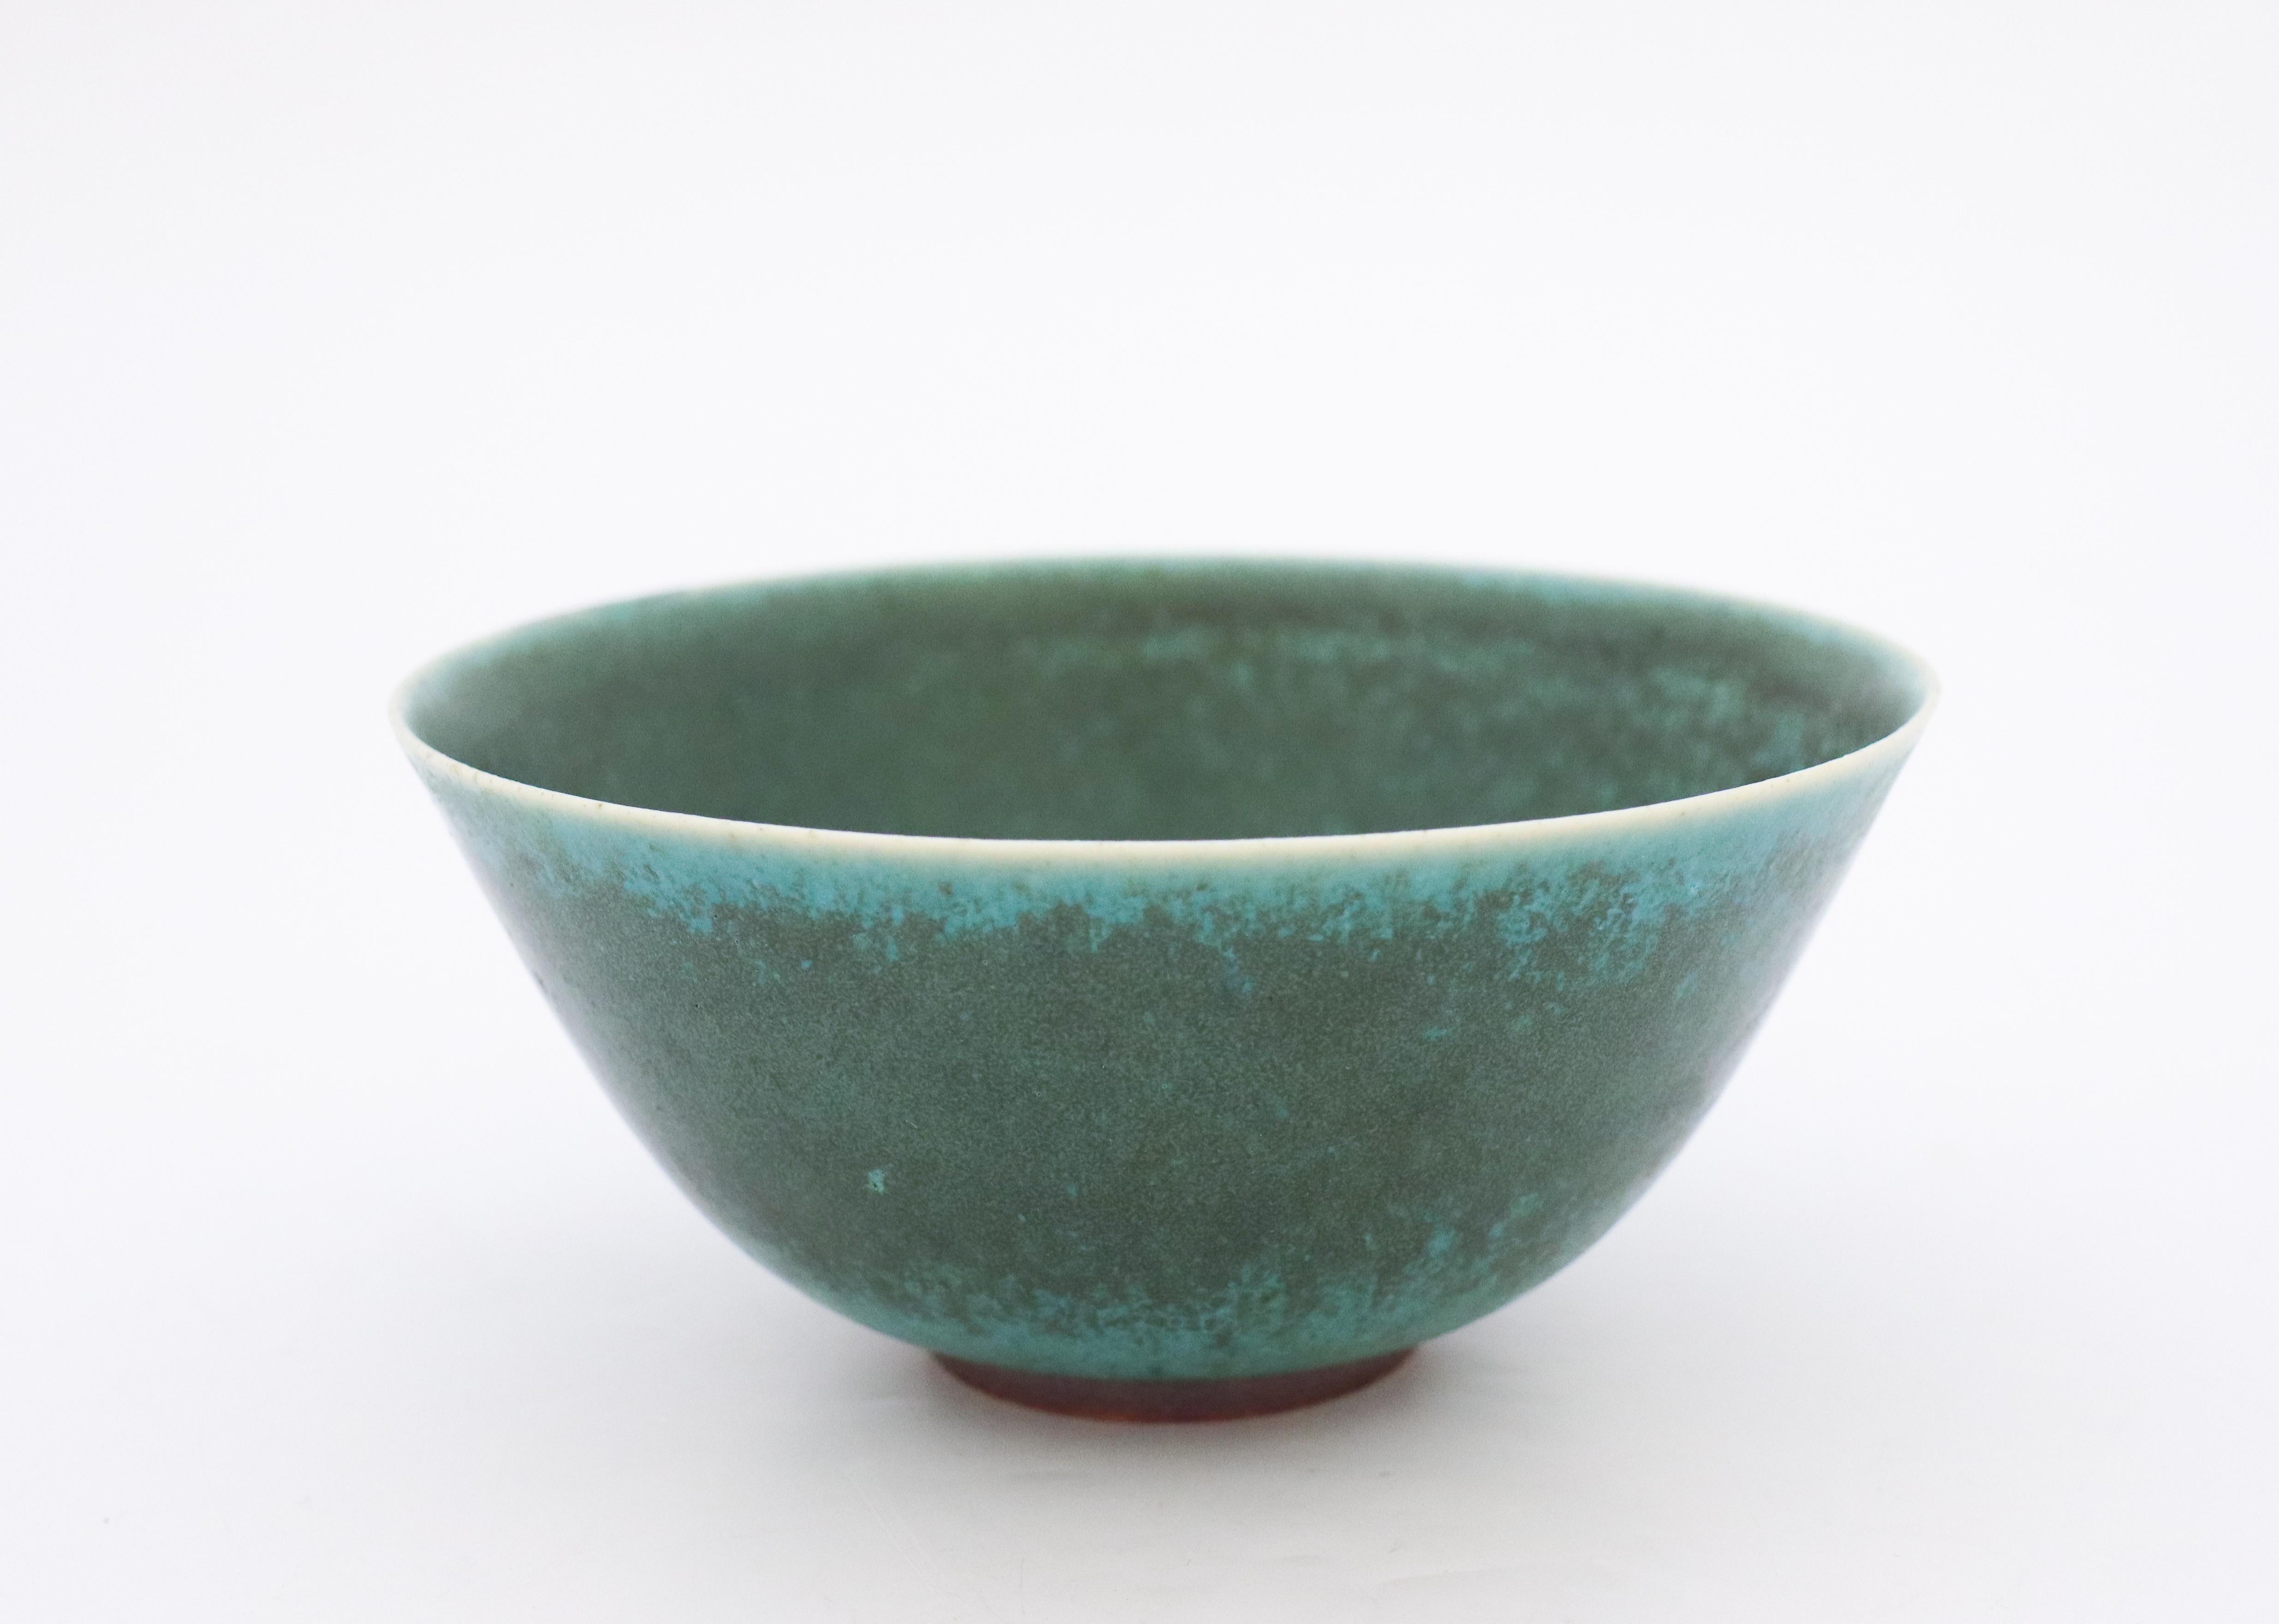 A lovely green & Turquoise bowl probably designed by Eva Stæhr Nielsen and produced at Saxbo in Denmark. The bowl is 16.5 cm in diameter and in mint condition.
 